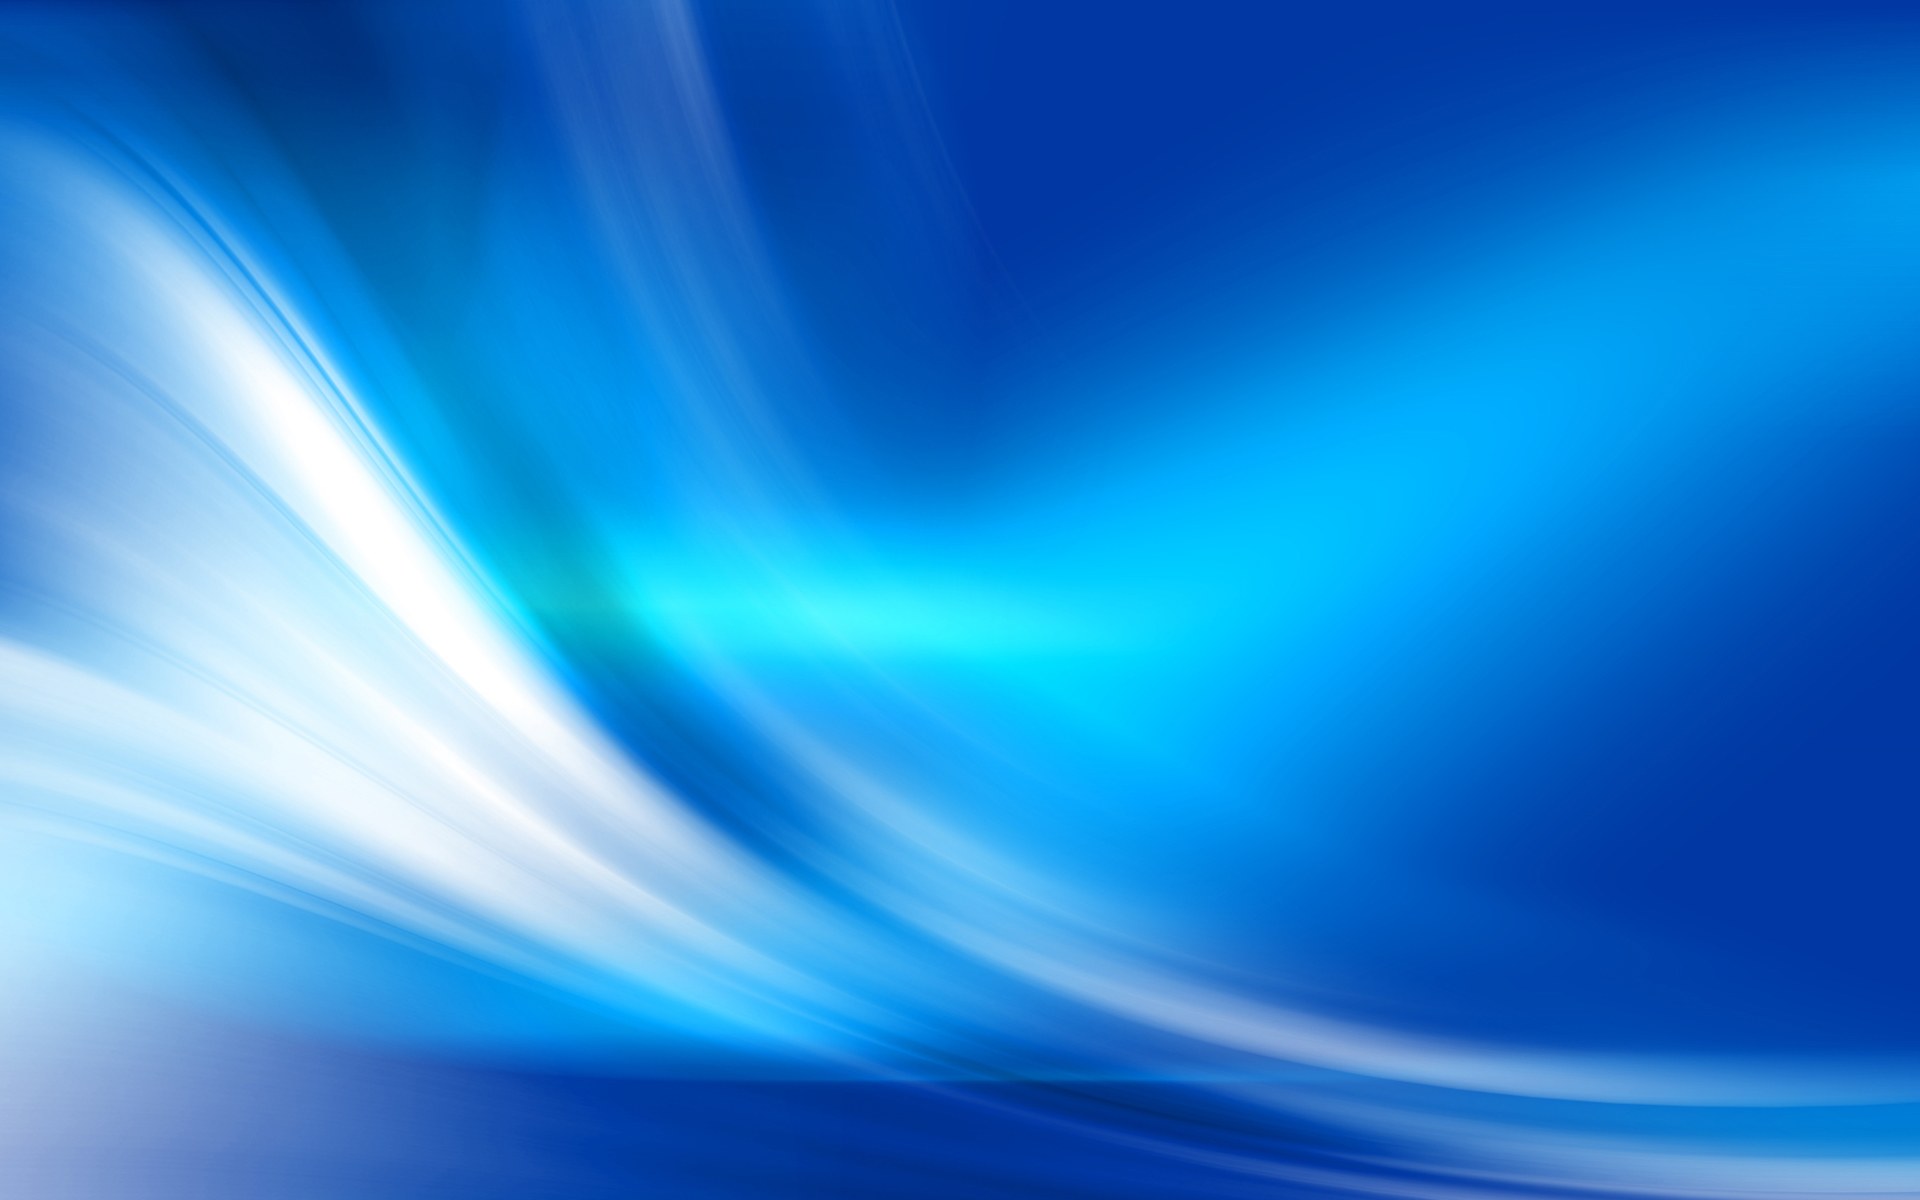 Abstract Blue backgrounds 3 Wallpapers   HD Wallpapers 71441